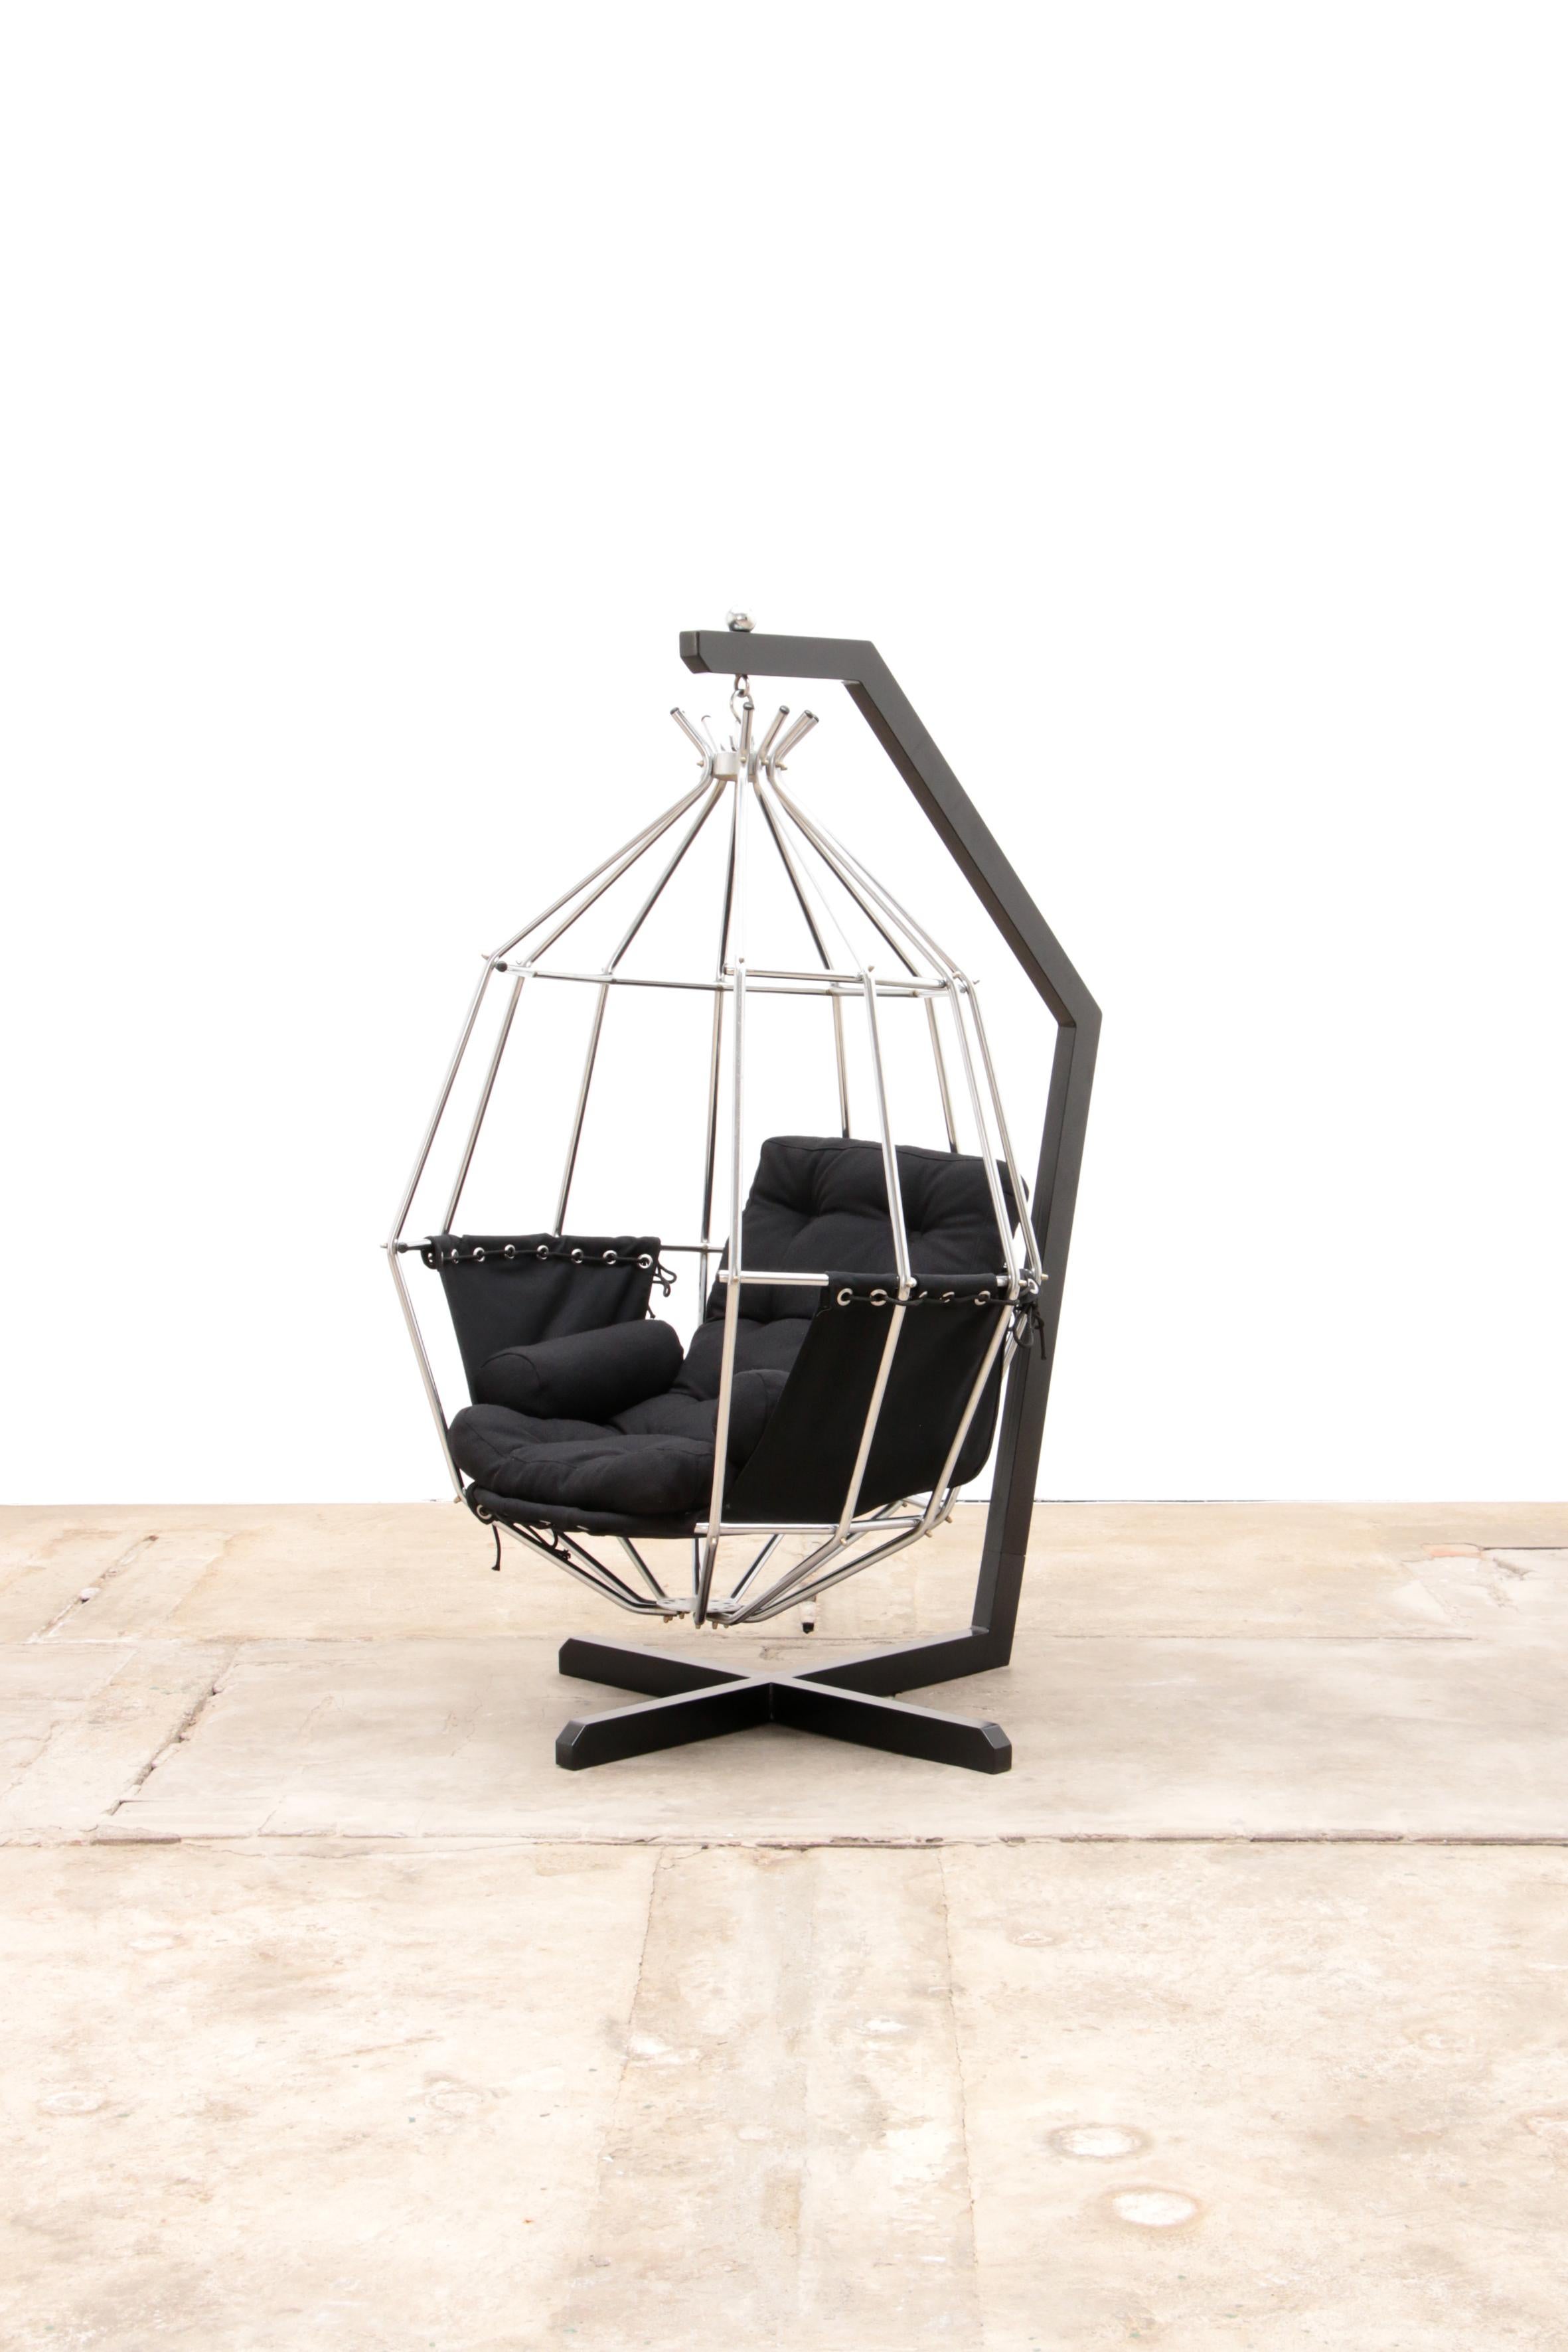 Designed by IB Arberg and produced by IBAR Design in Sweden in the 1970s. Once you see one, you'll immediately recognize every Papegojan (parrot) chair you see. An exceptional piece, as comfortable as it is remarkable. The actual item is made of